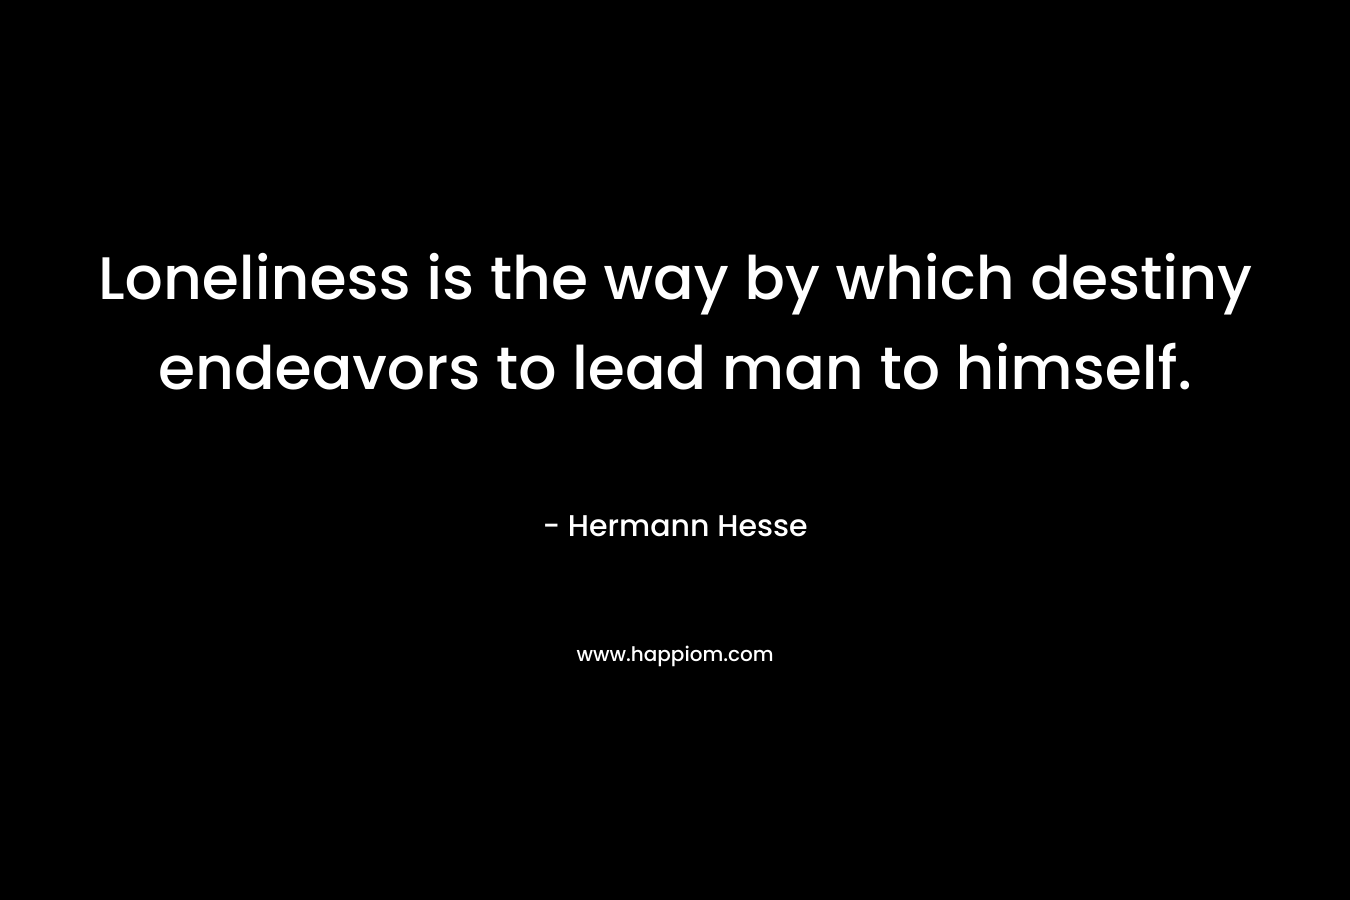 Loneliness is the way by which destiny endeavors to lead man to himself.